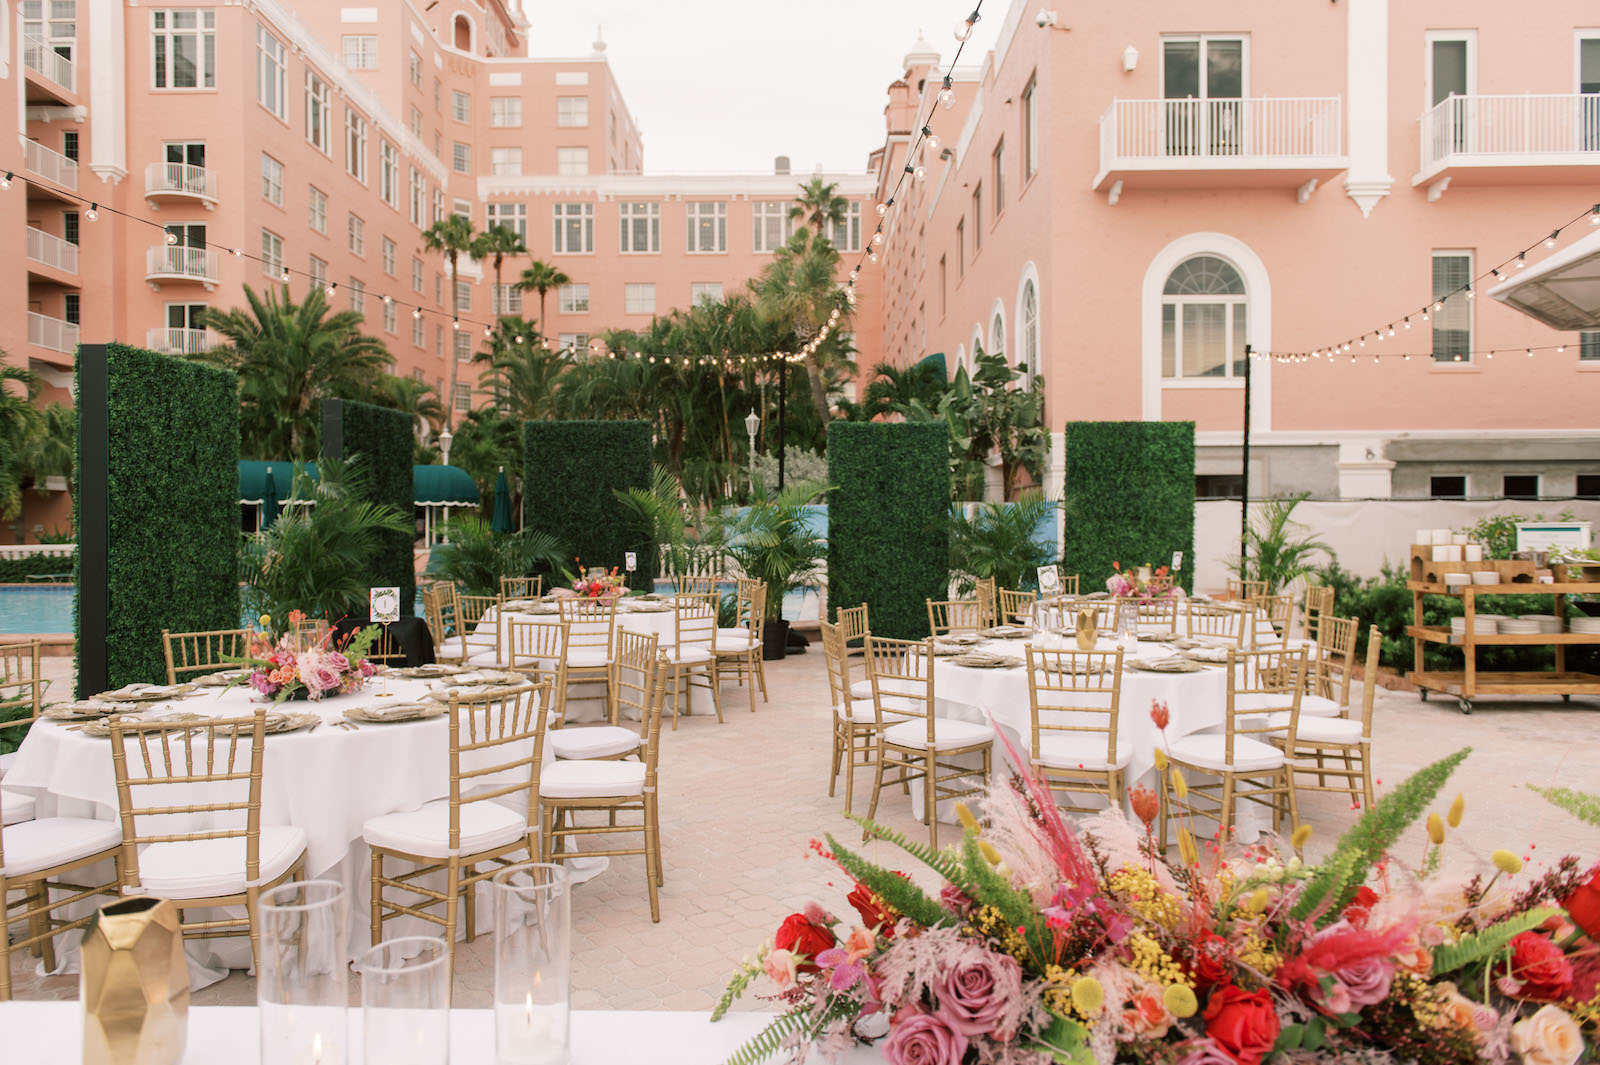 Vibrant Boho Courtyard Wedding Reception Decor, Gold Chiavari Chairs, White Linens, Low Floral Centerpieces, Hanging String Lights, Greenery Hedge Walls | St. Petersburg Waterfront Wedding Venue The Don CeSar